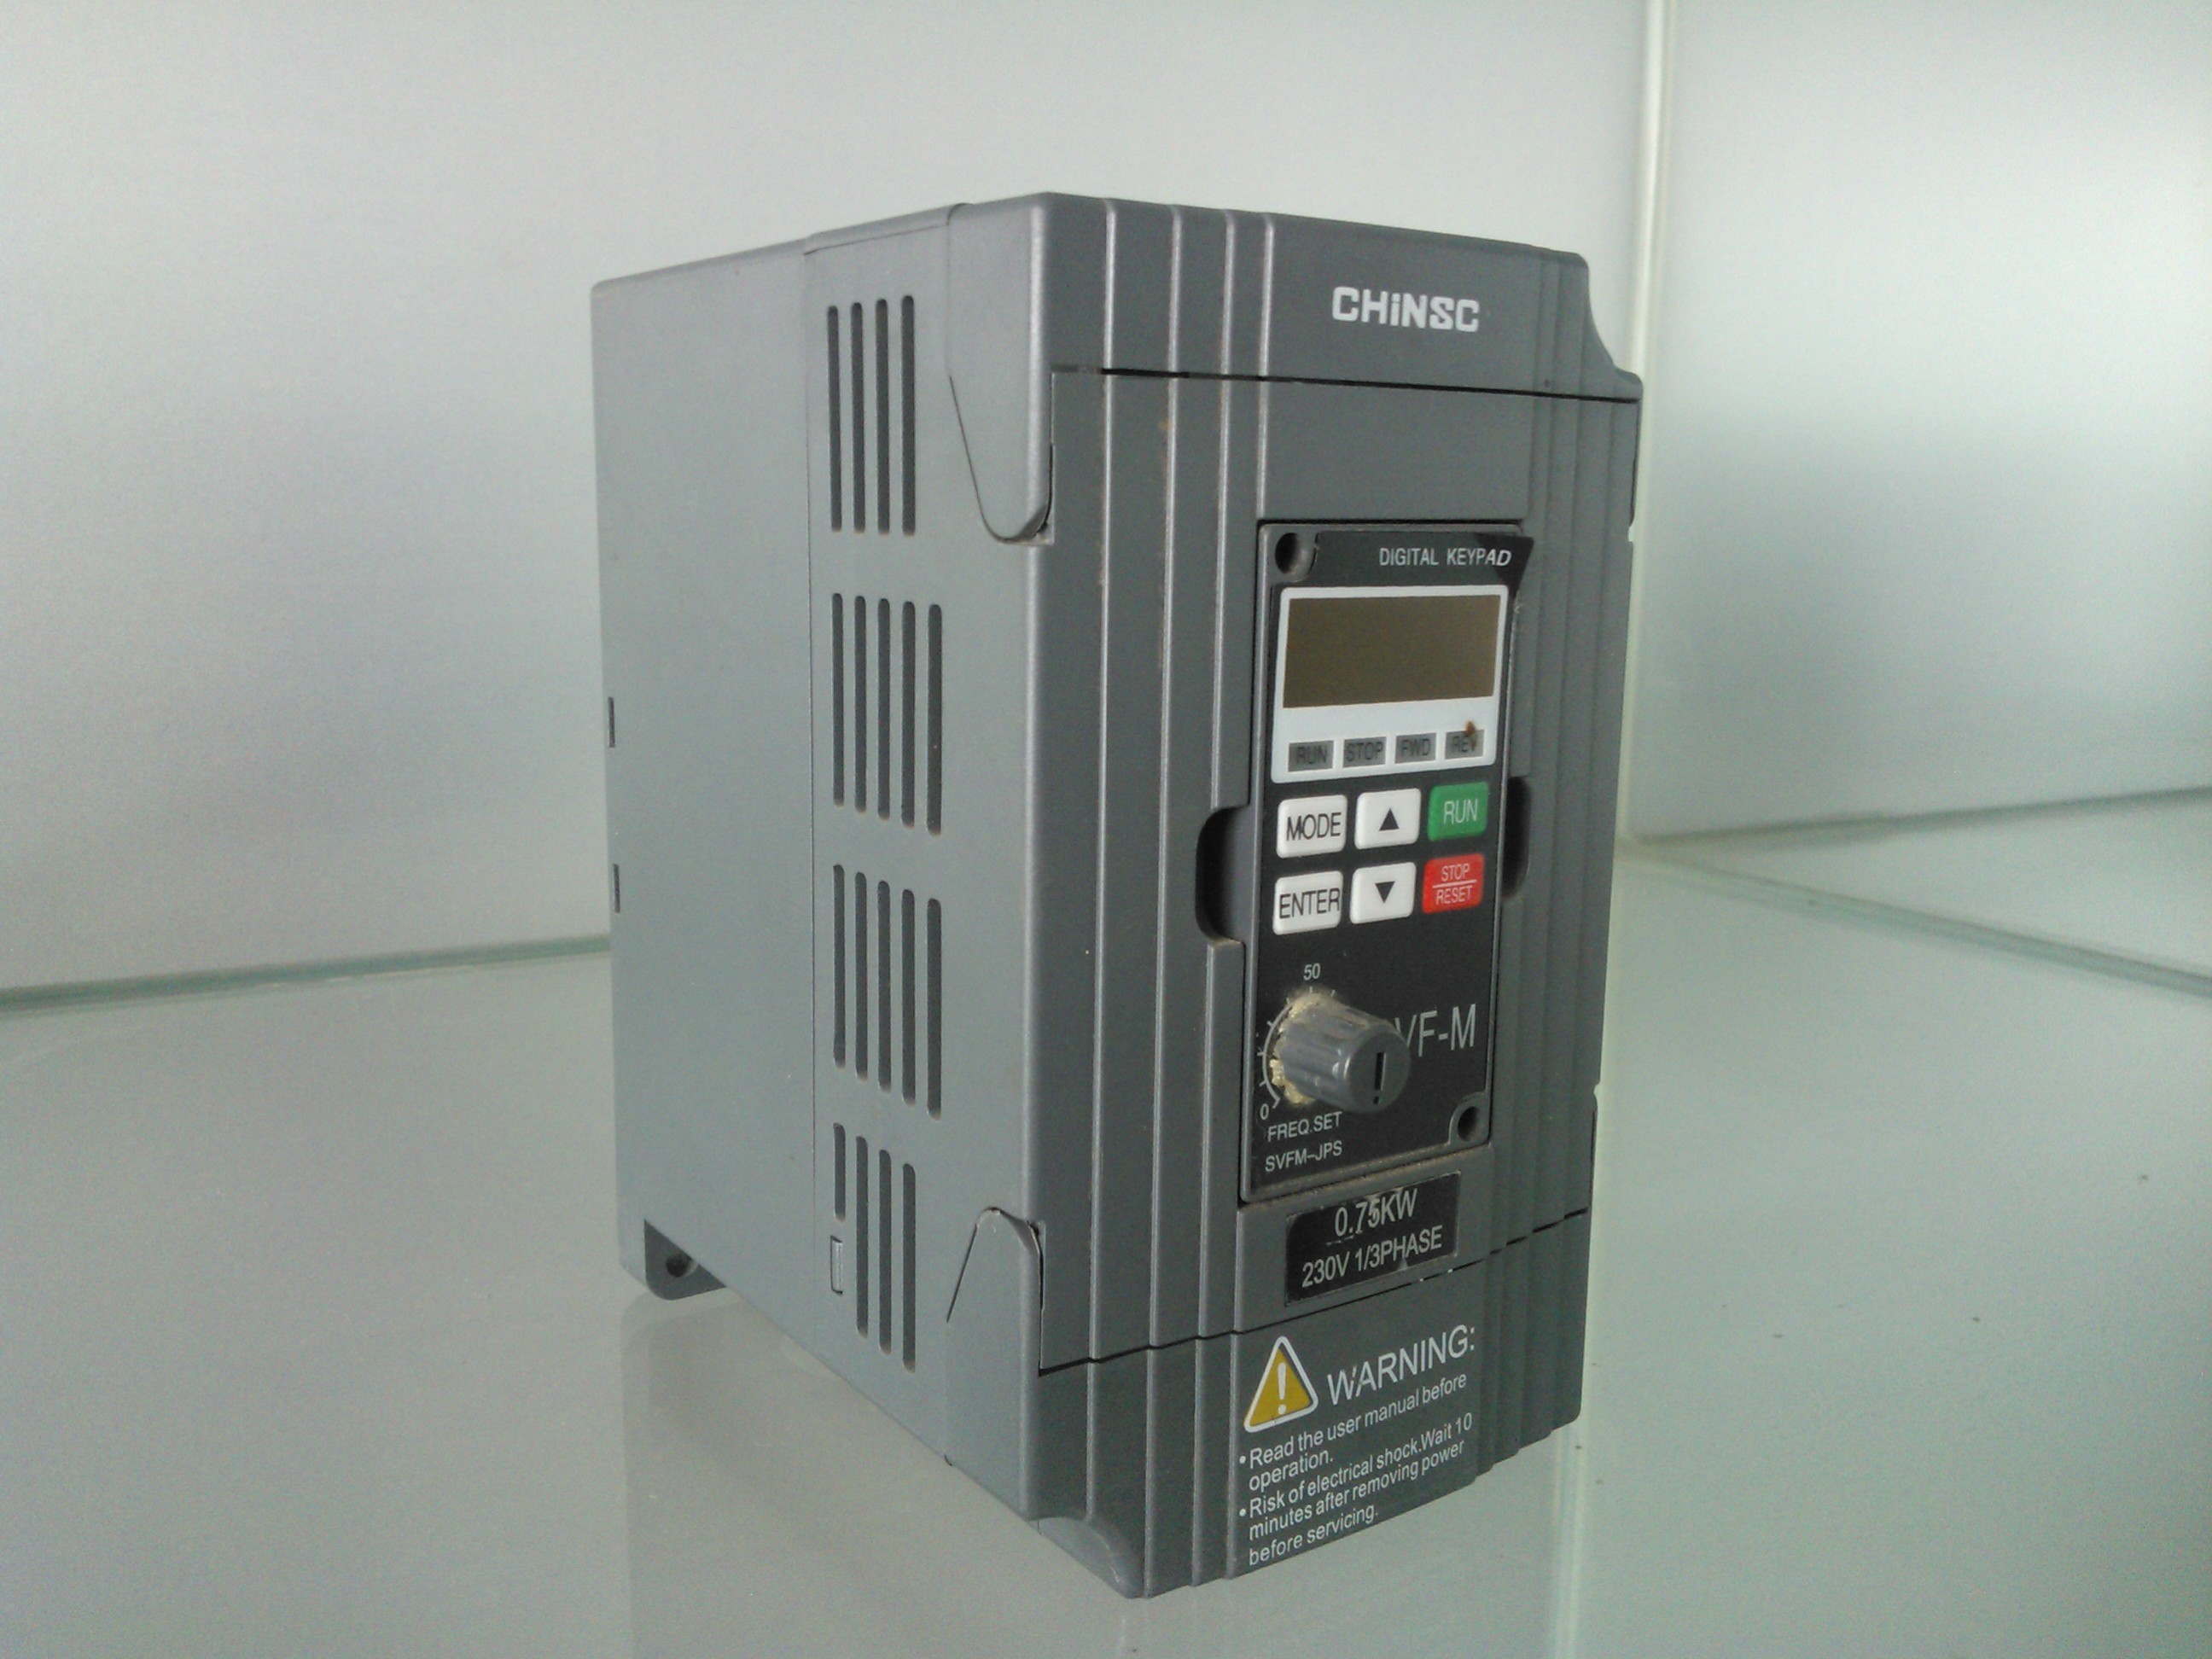 MINI Series Frequency Inverter 220v 380v  from 0.4kw to 0.75kw